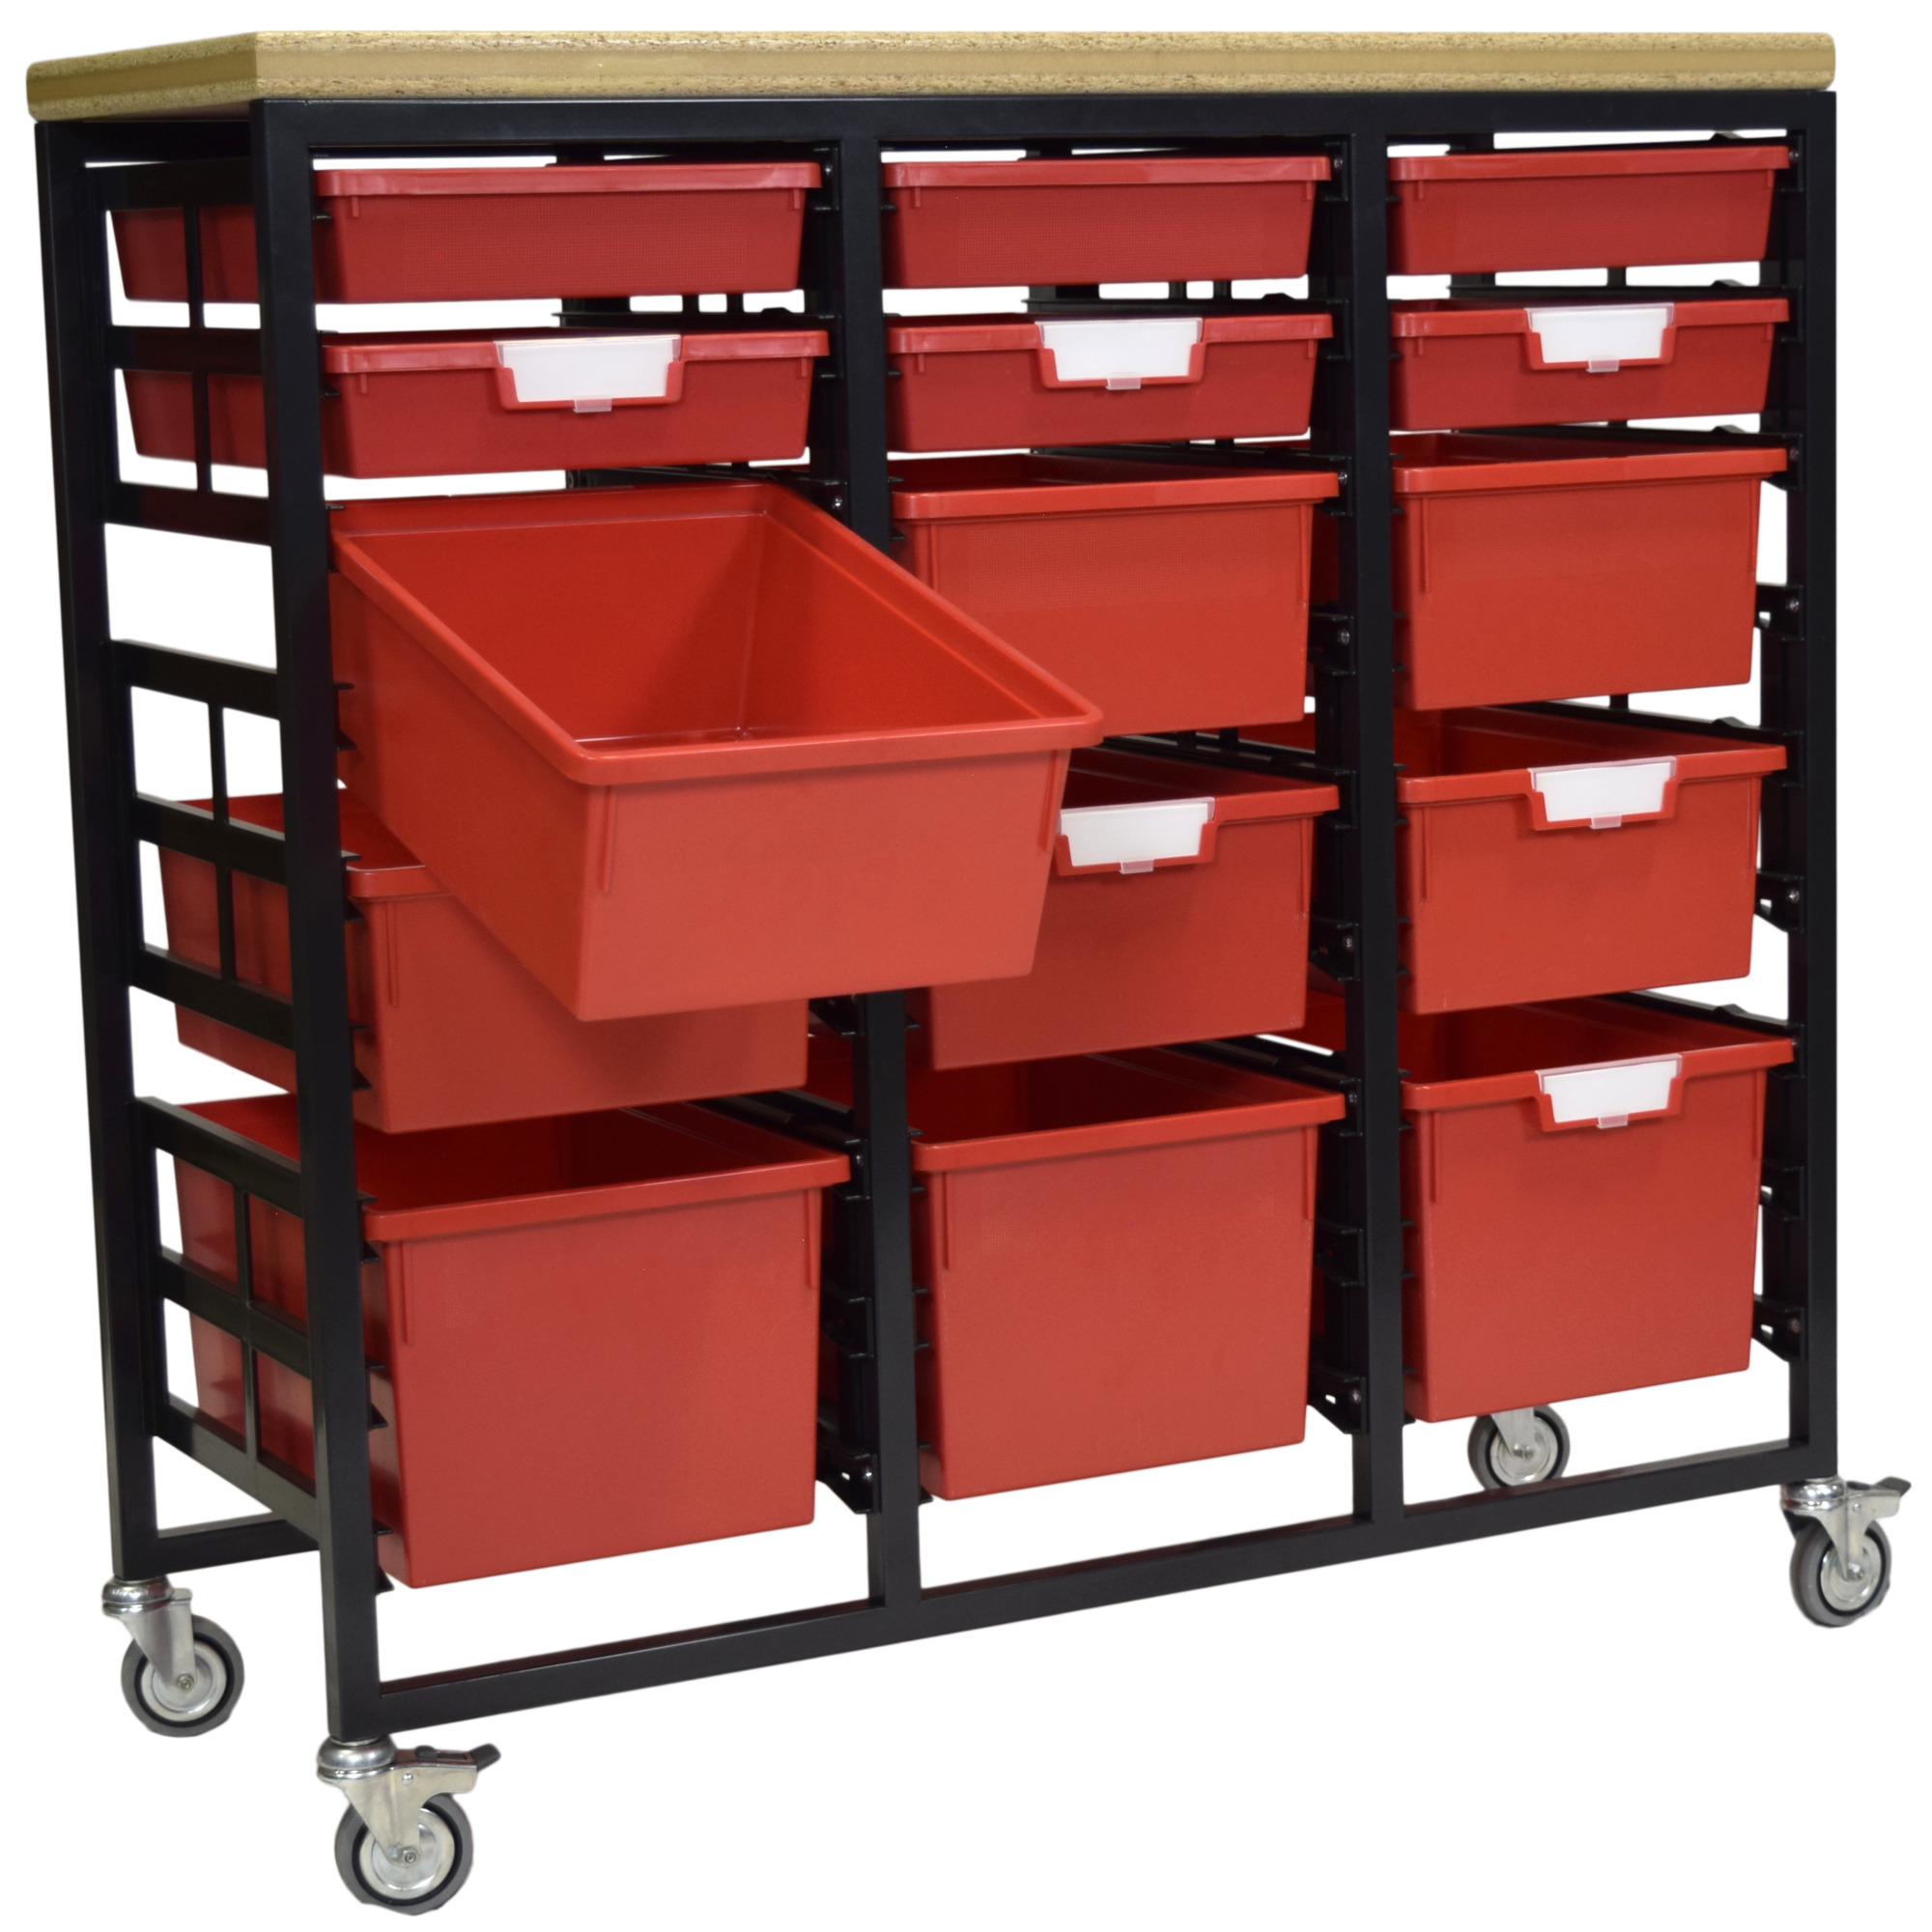 Certwood StorWerks, Mobile Work Station w/Wood Top -15 Trays-Red, Included (qty.) 15, Material Plastic, Height 12 in, Model CE2103DGGC-6S6D3TPR